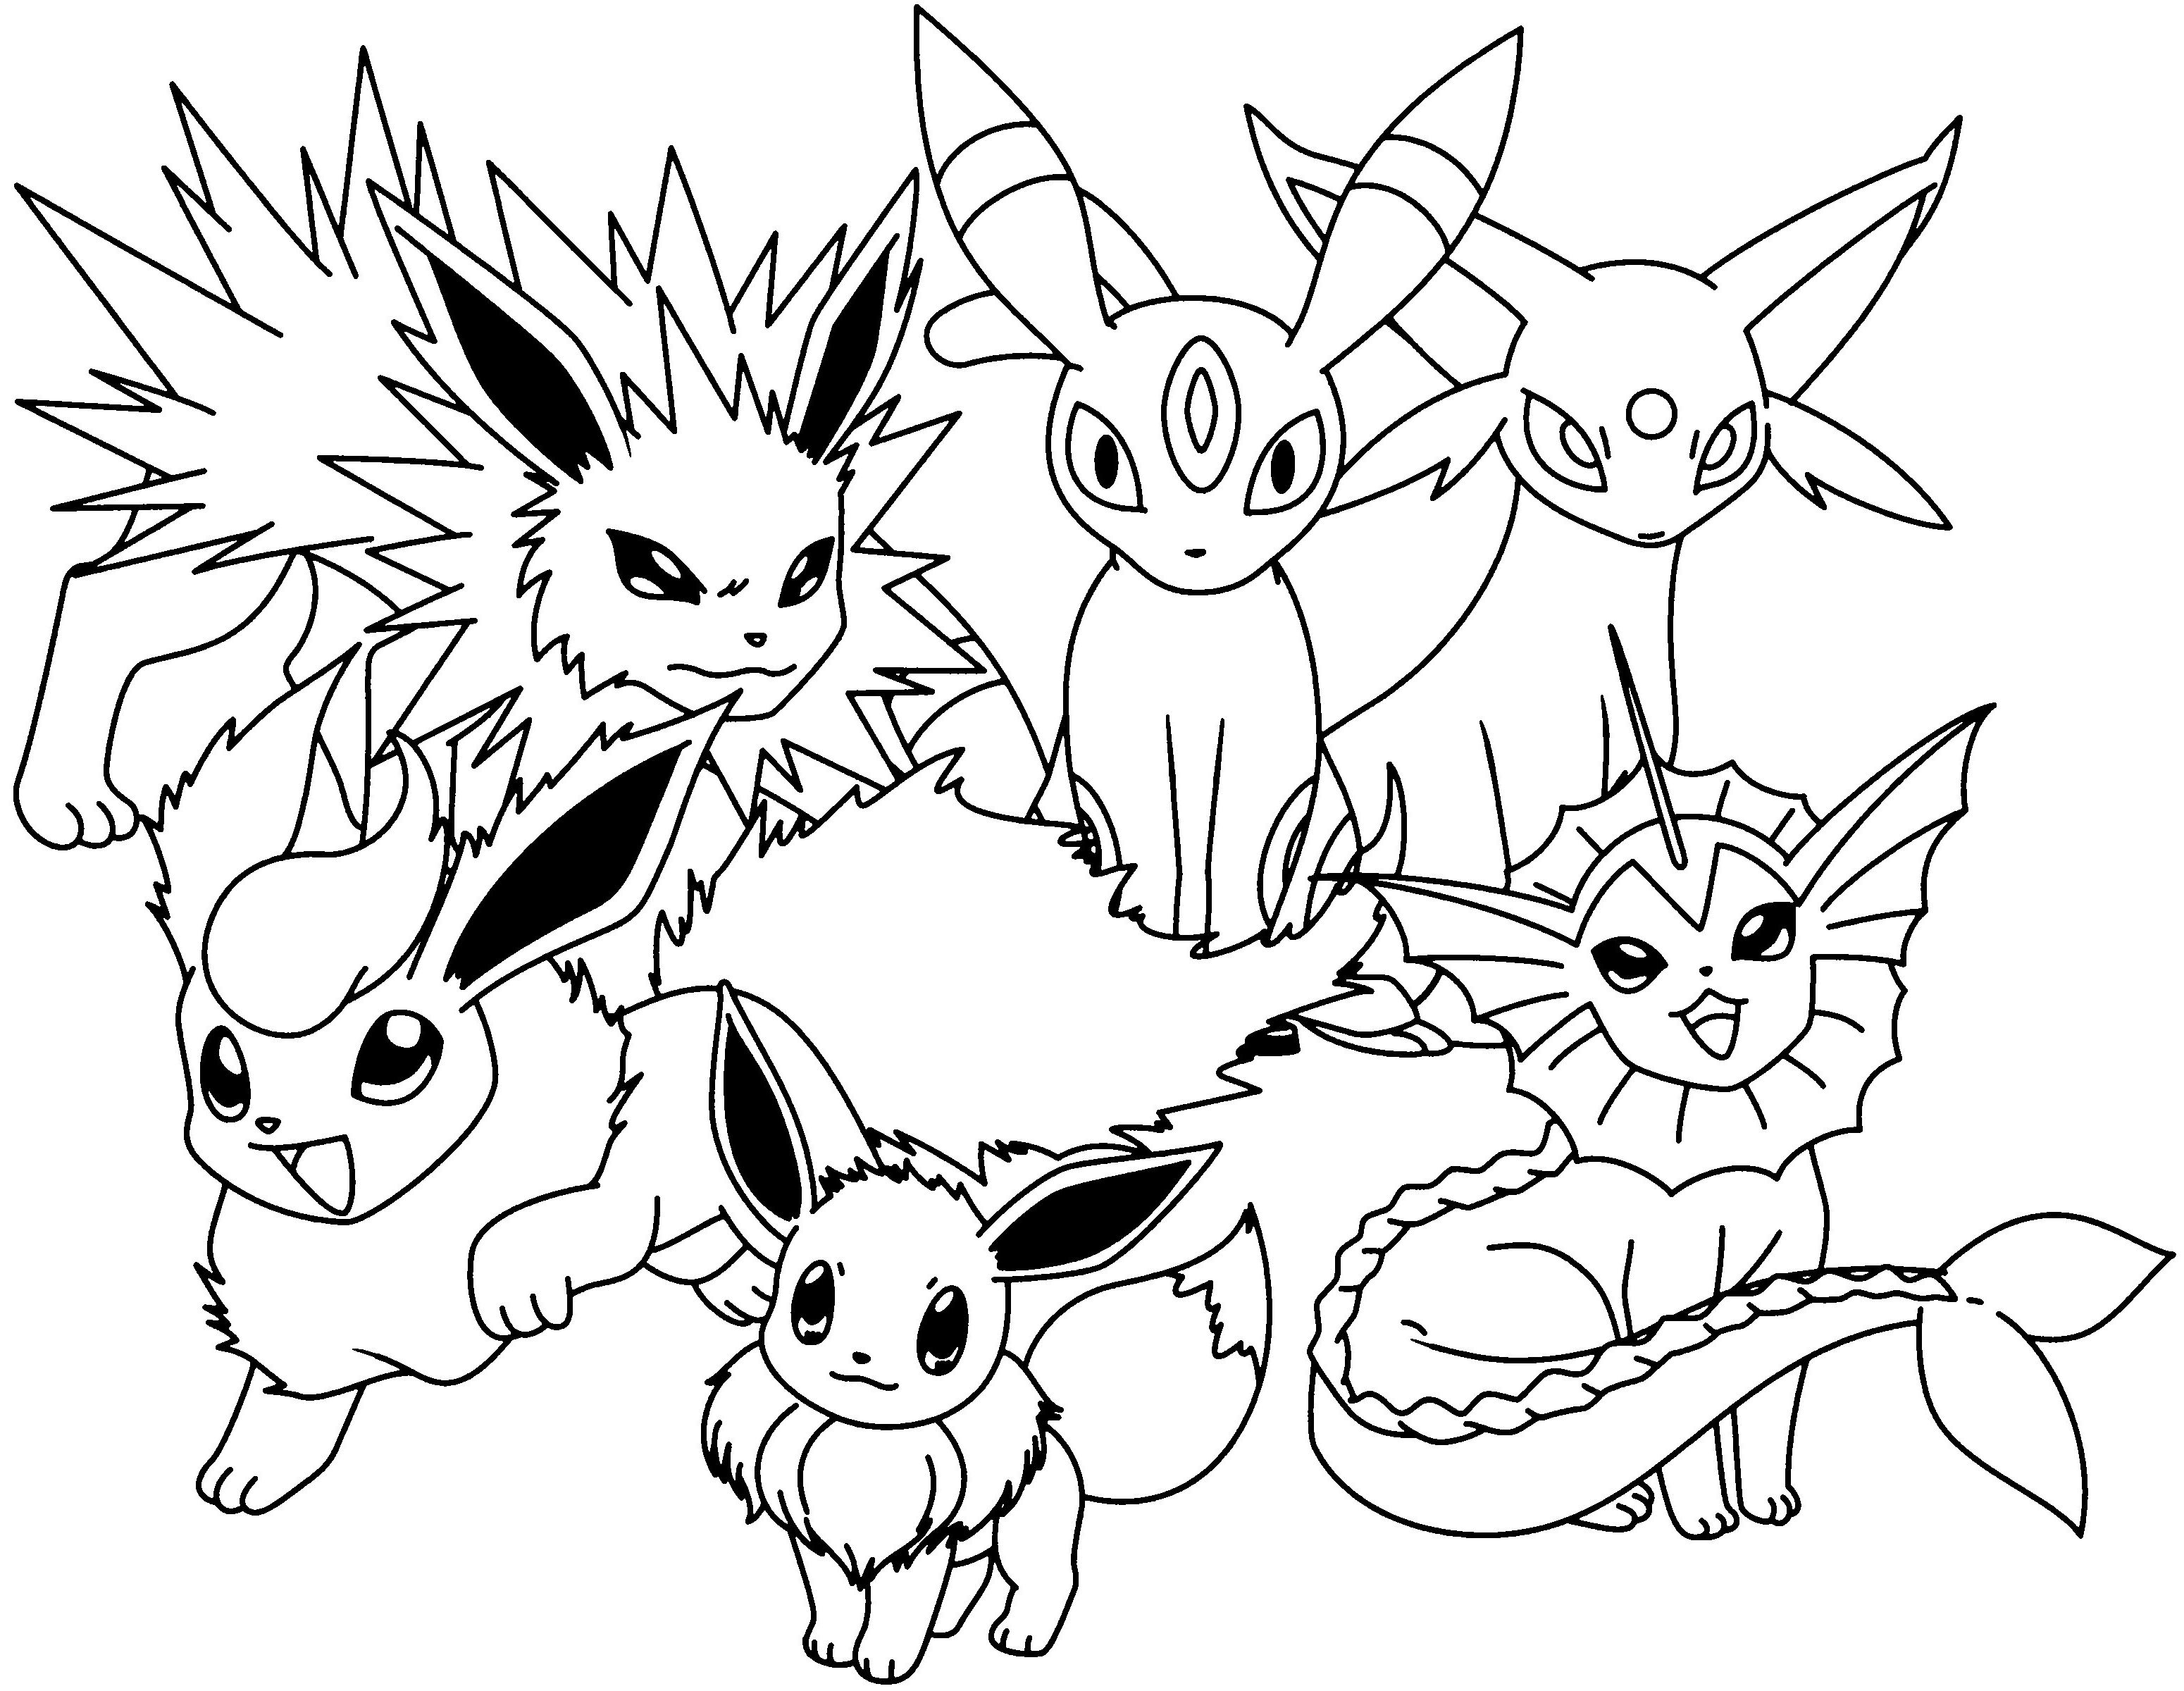 Pokemon Coloring Pages. Join your favorite Pokemon on an Adventure! |  Pokemon coloring, Pokemon coloring pages, Cartoon coloring pages